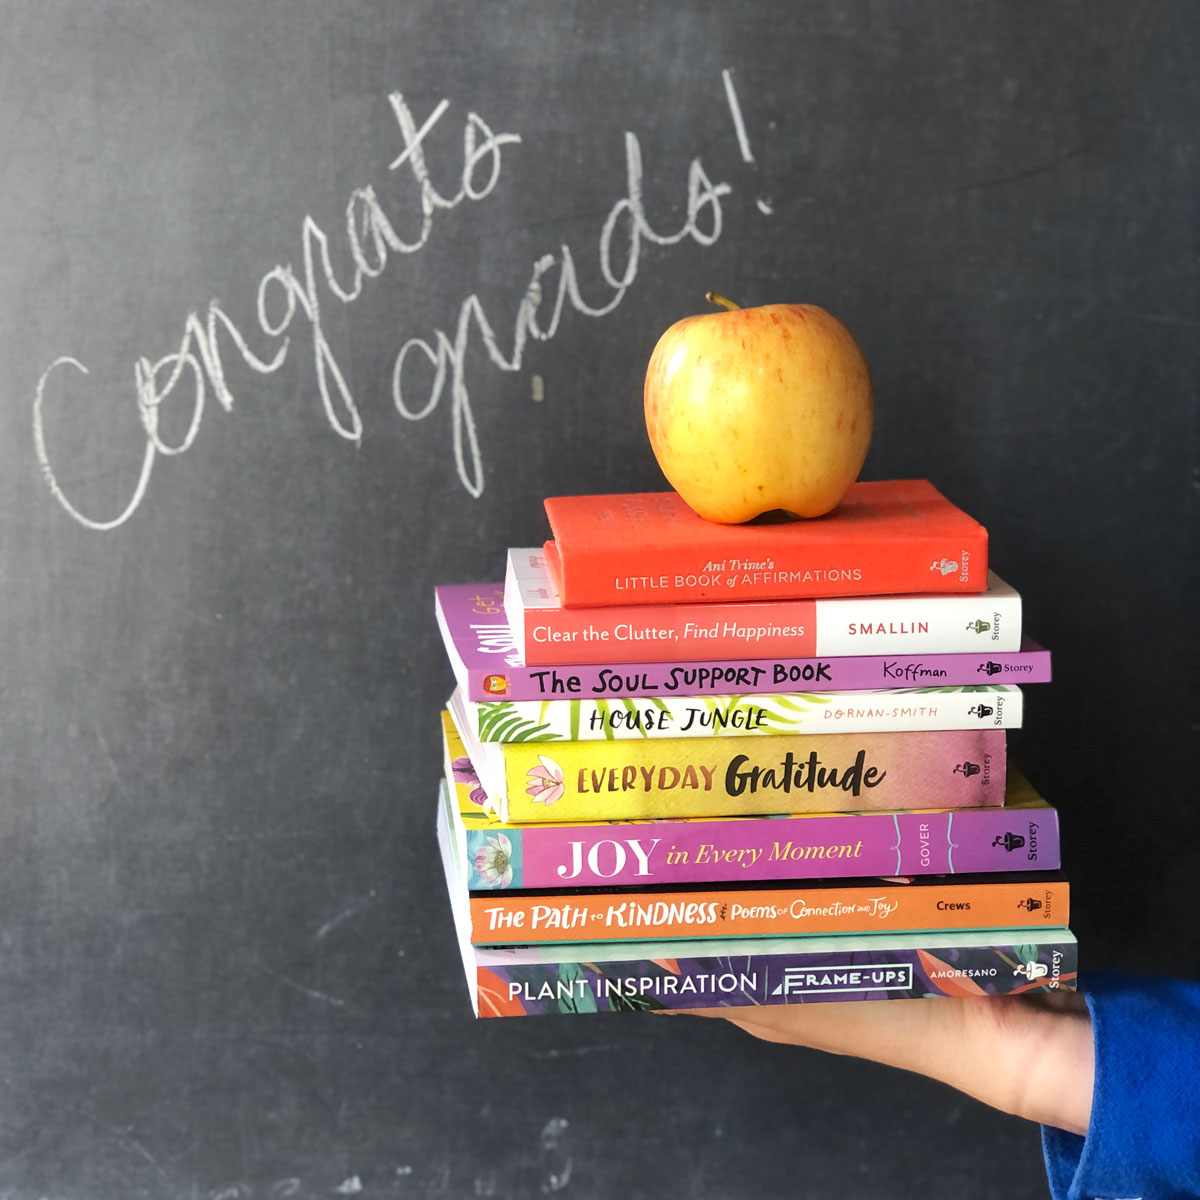 Photo of book stack in front of chalkboard that says "Congrats grads!"